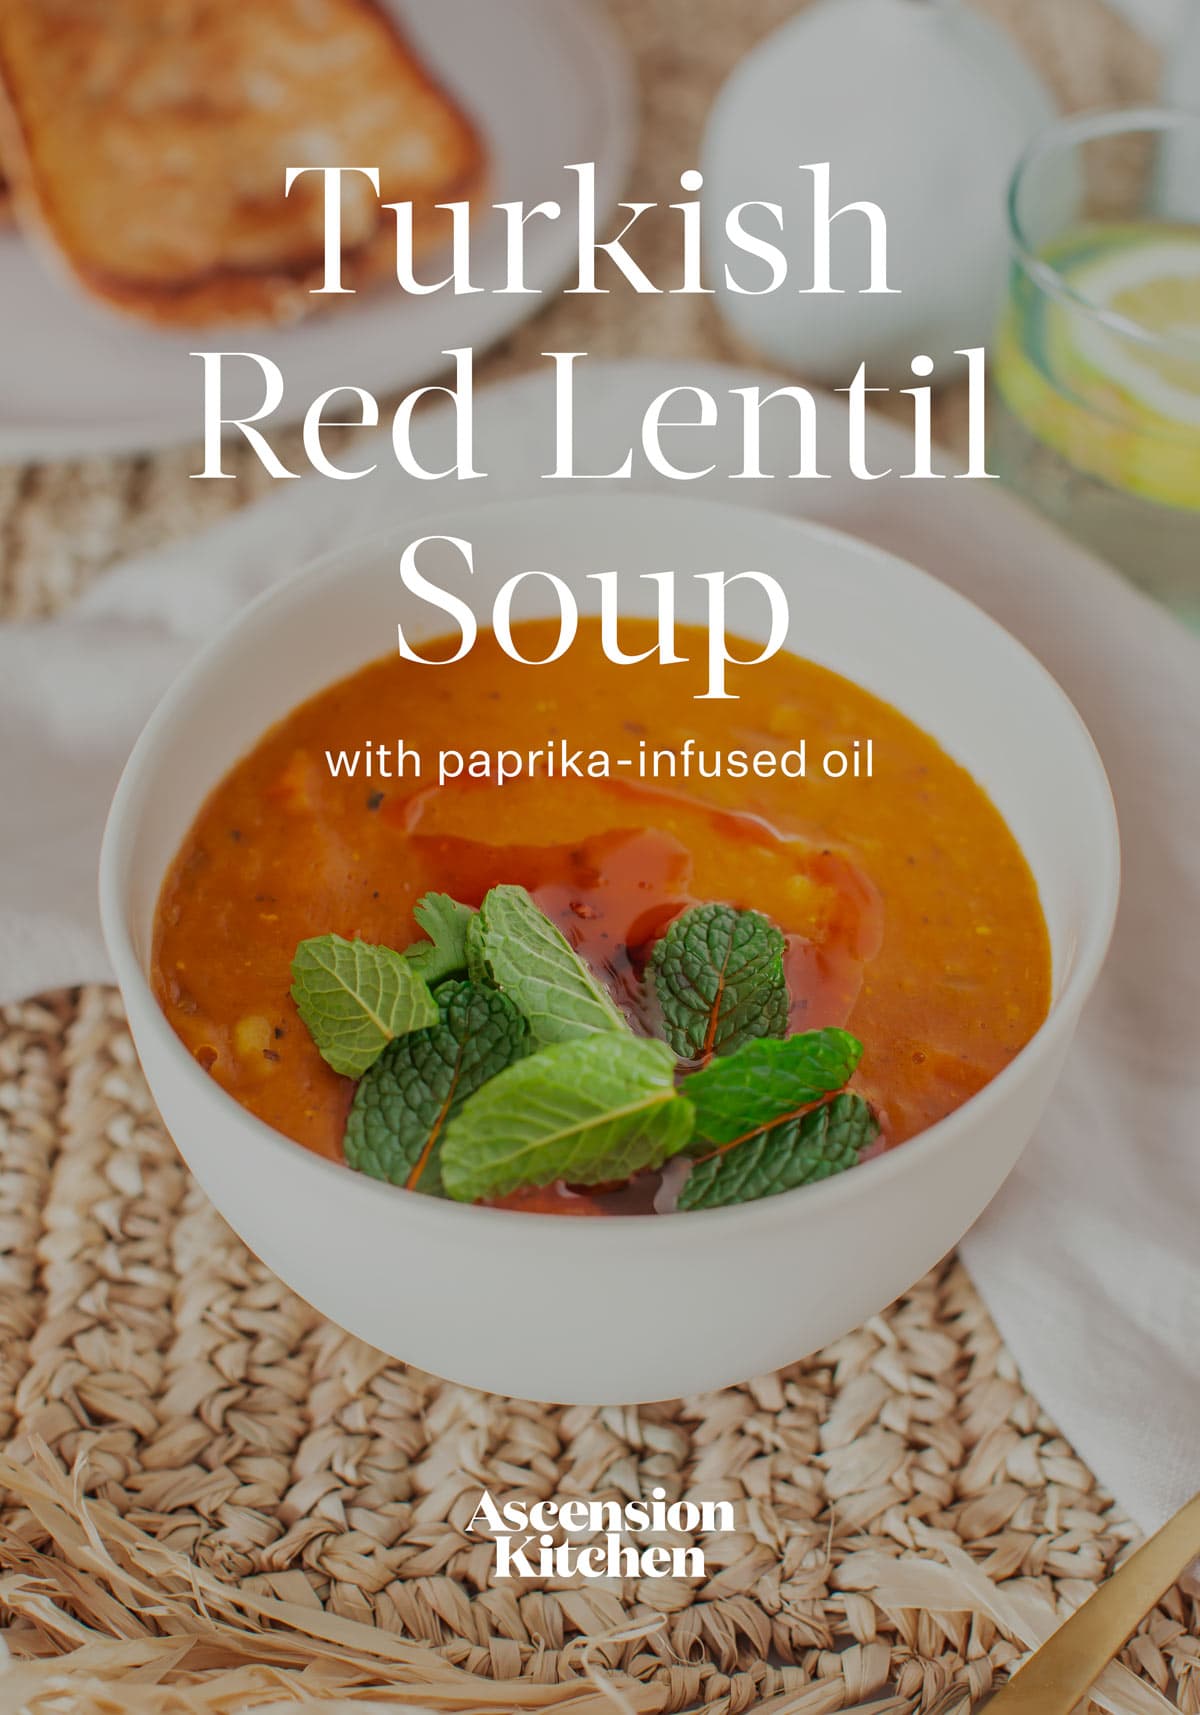 Ceramic bowl filled with a bright orange red creamy Turkish Lentil Soup, mint leaves on top